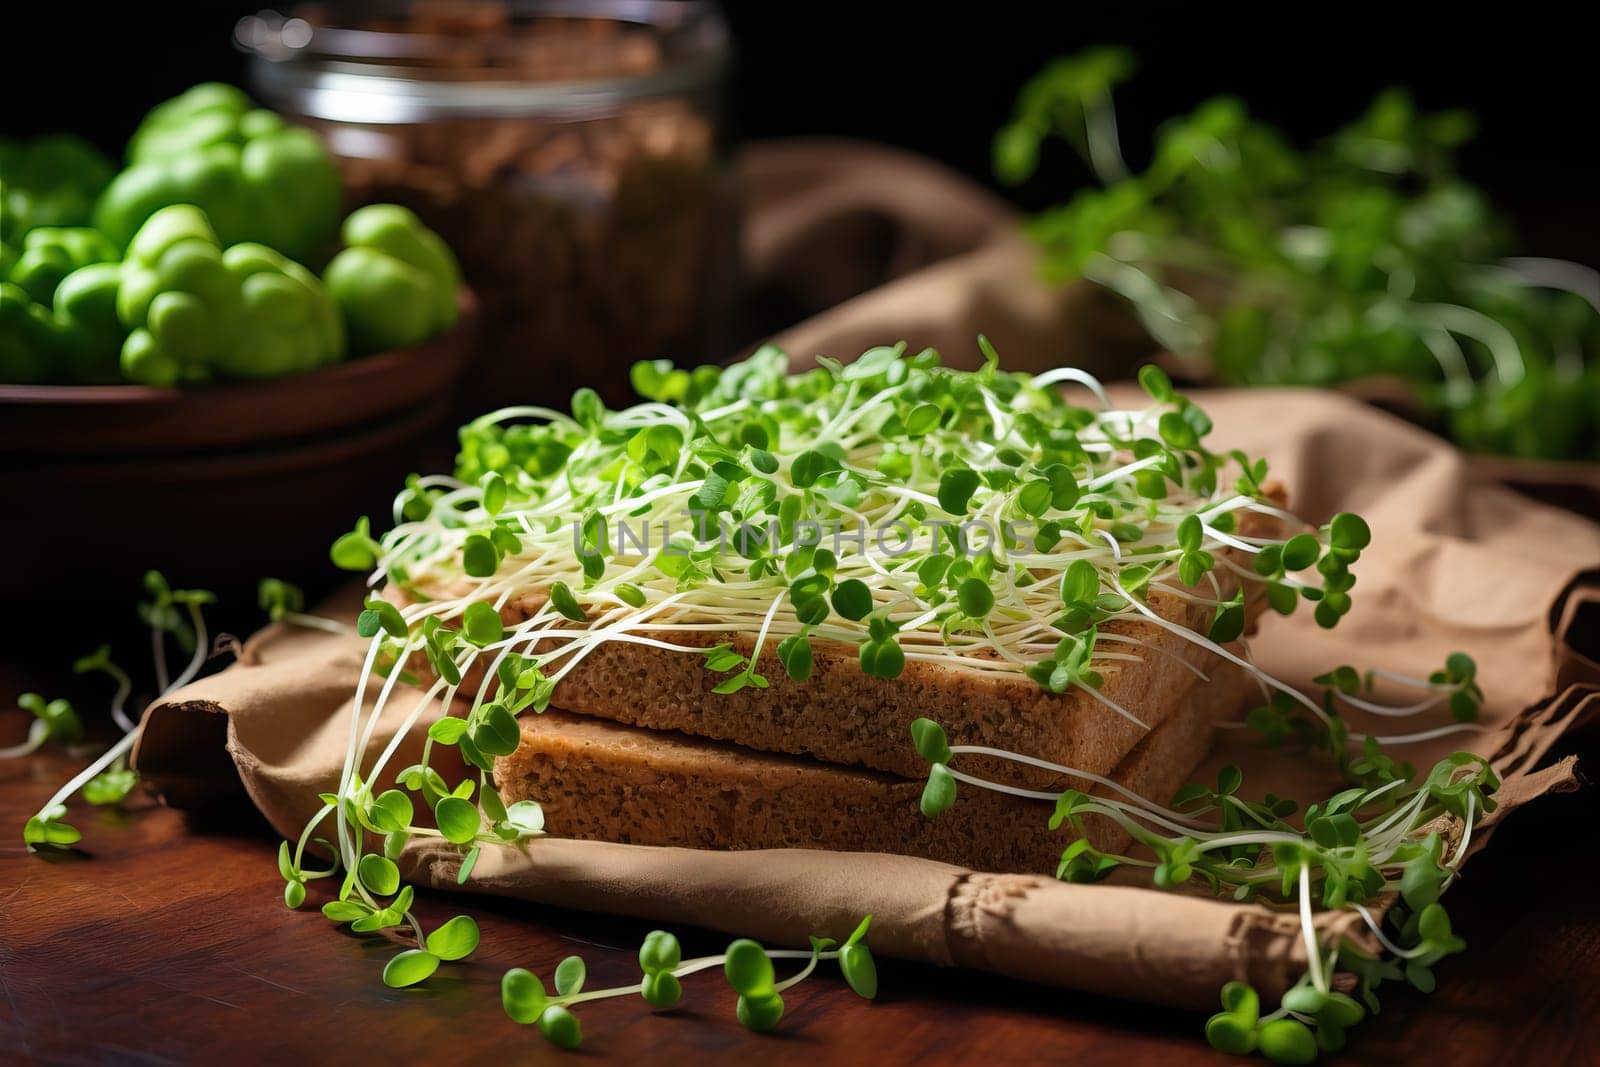 Useful microgreens on the table in the kitchen, growing microgreens at home. Pieces of bread are covered with green microgreens for a healthy breakfast.